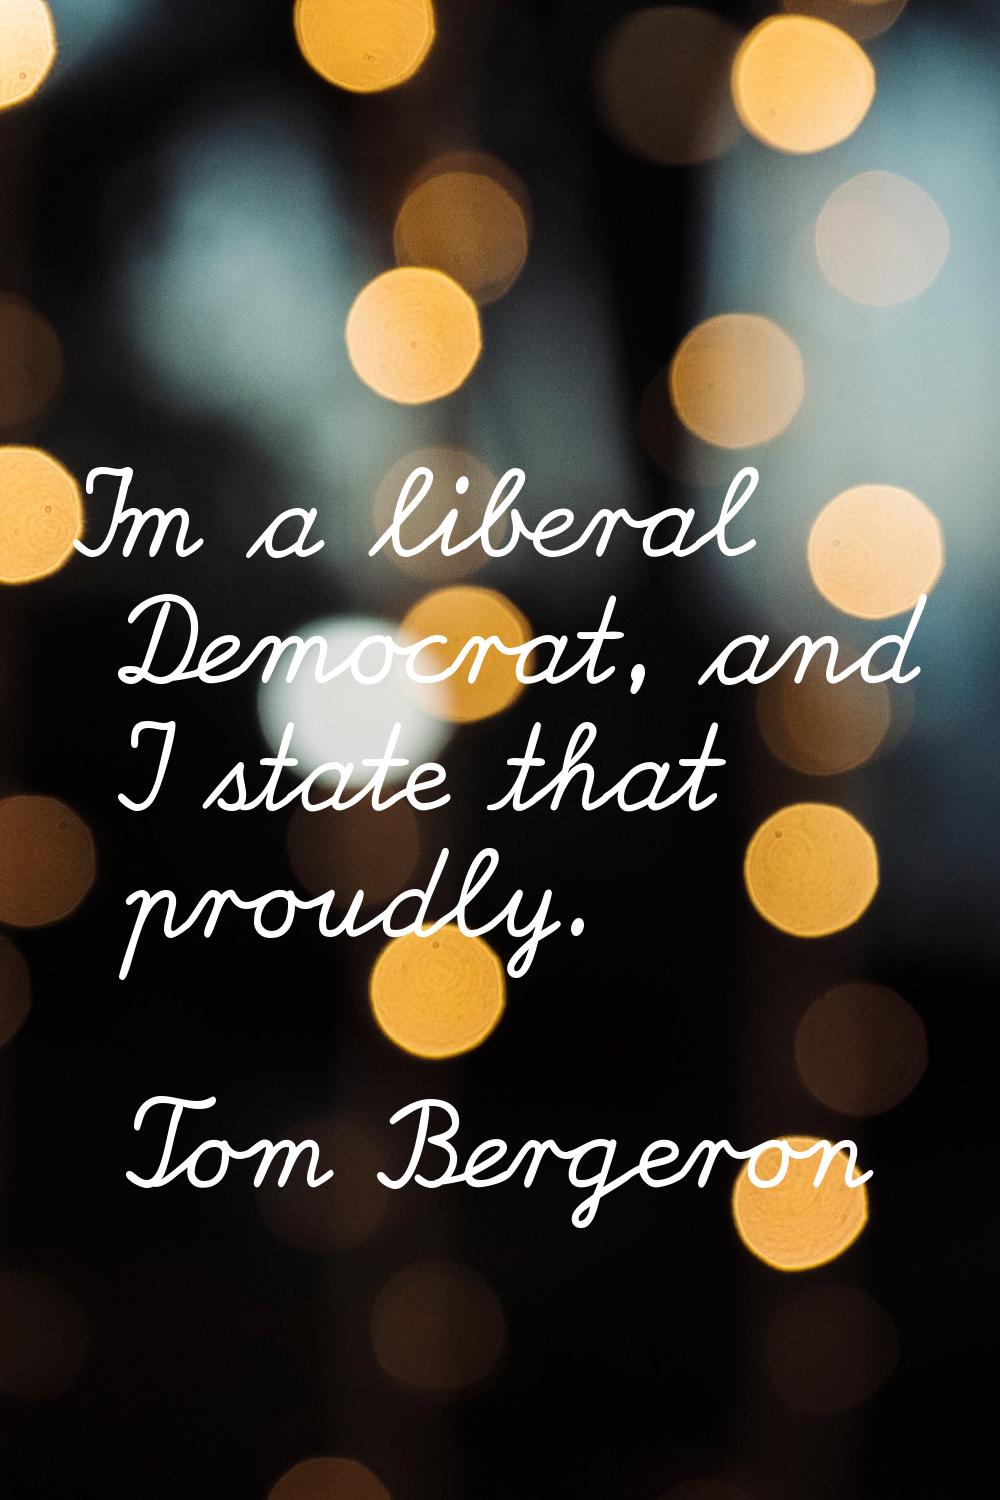 I'm a liberal Democrat, and I state that proudly.